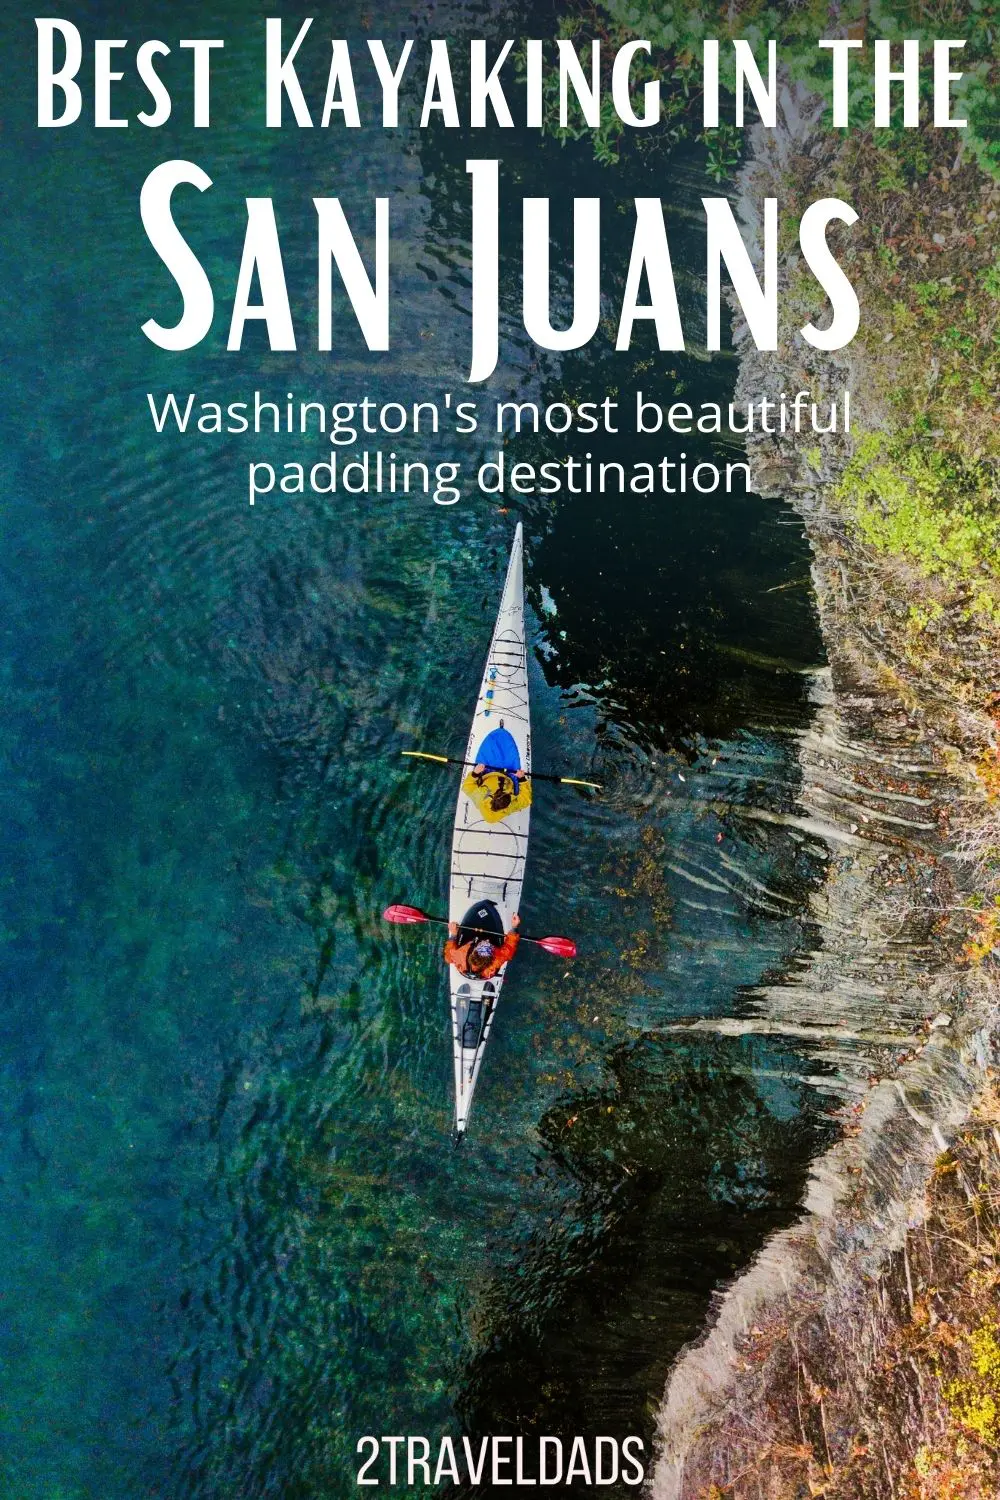 Best kayaking in the San Juan Islands of Washington. Kayak tours and best places to launch in the San Juans, including kayaking with orcas and bioluminescence near Seattle.